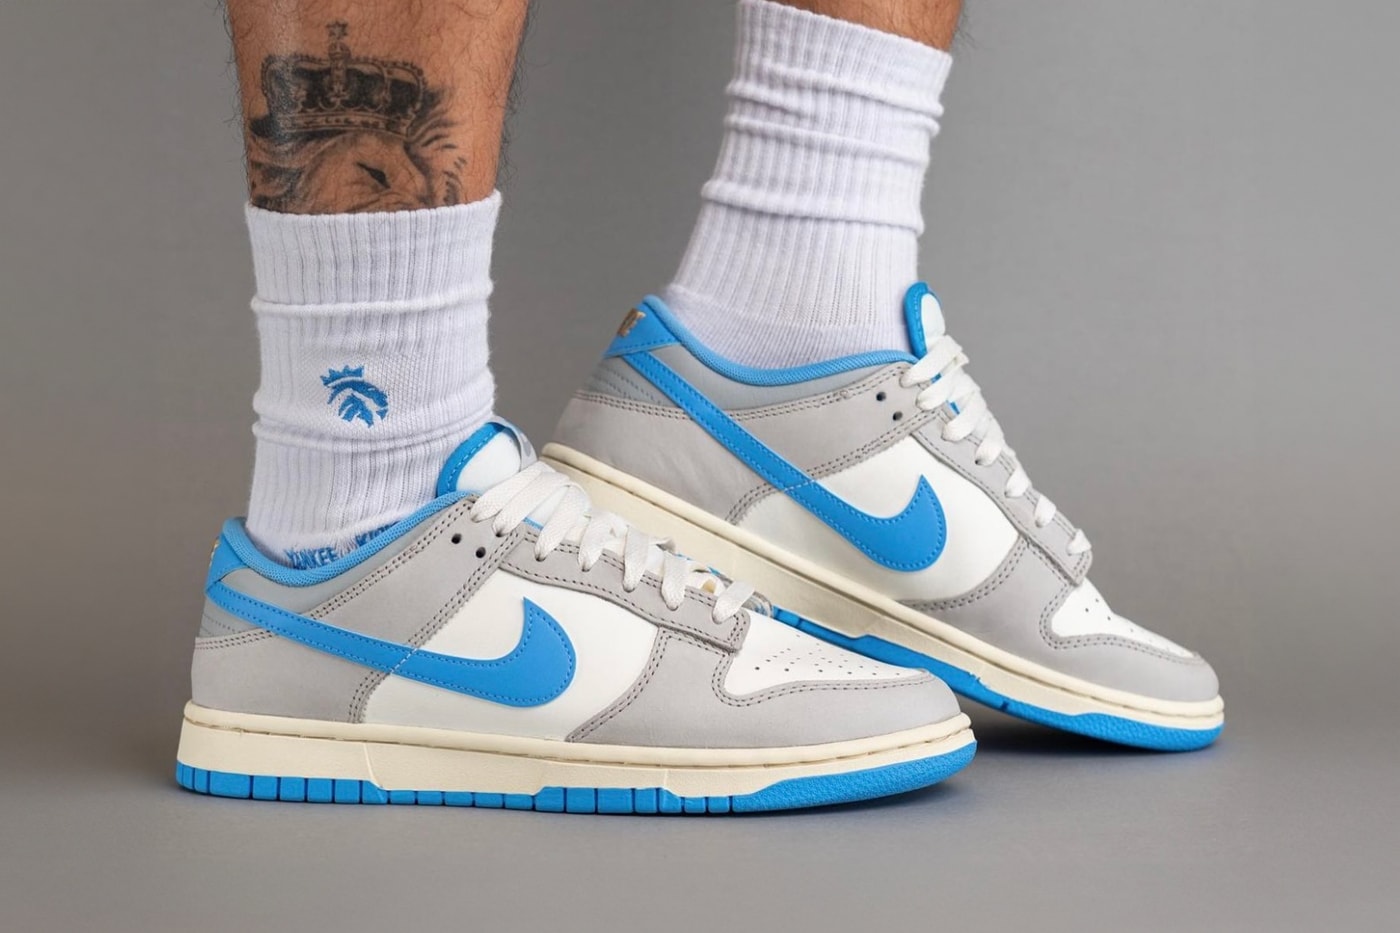 On-Feet Look at the Nike Dunk Low "Athletic Department" FN7488-133 Sail/University Blue-Light Iron Ore-Light Smoke Grey-Coconut Milk sneakers swoosh low top university blue